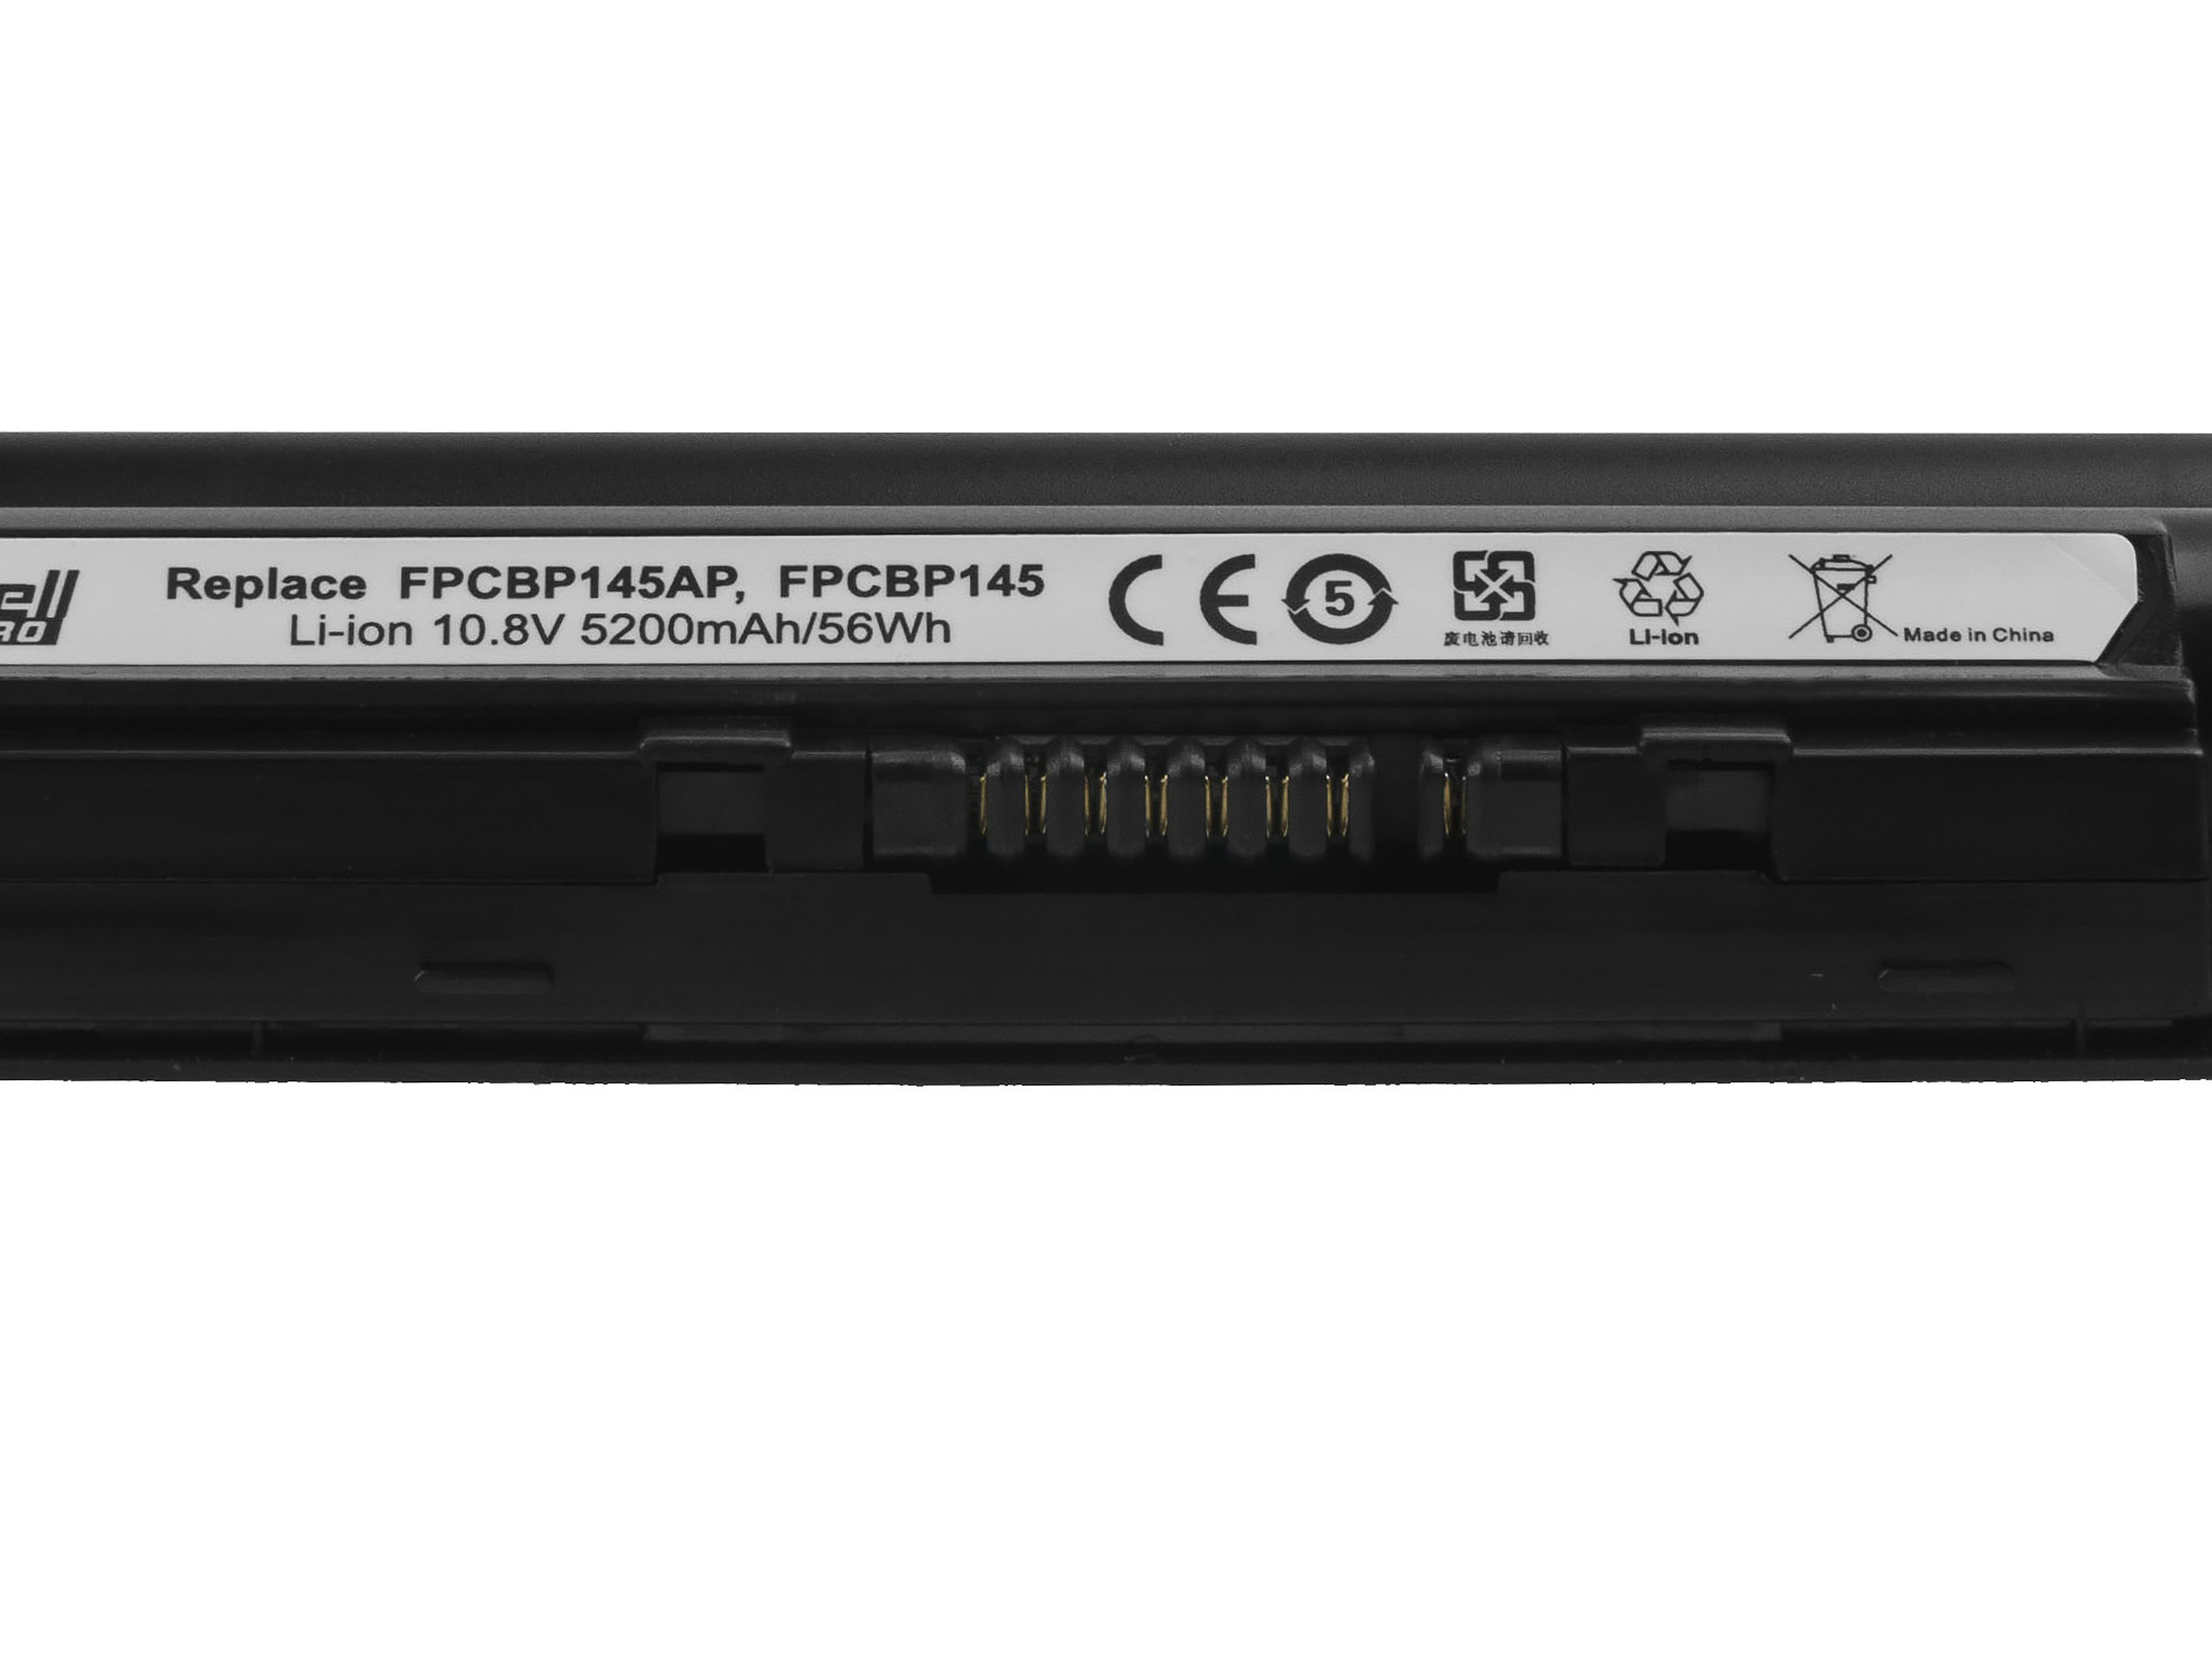 Green Cell Battery PRO FPCBP145 FPCBP282 for Fujitsu LifeBook E751 E752 E781 E782 P770 P771 P772 S710 S751 S752 S760 S761 S762